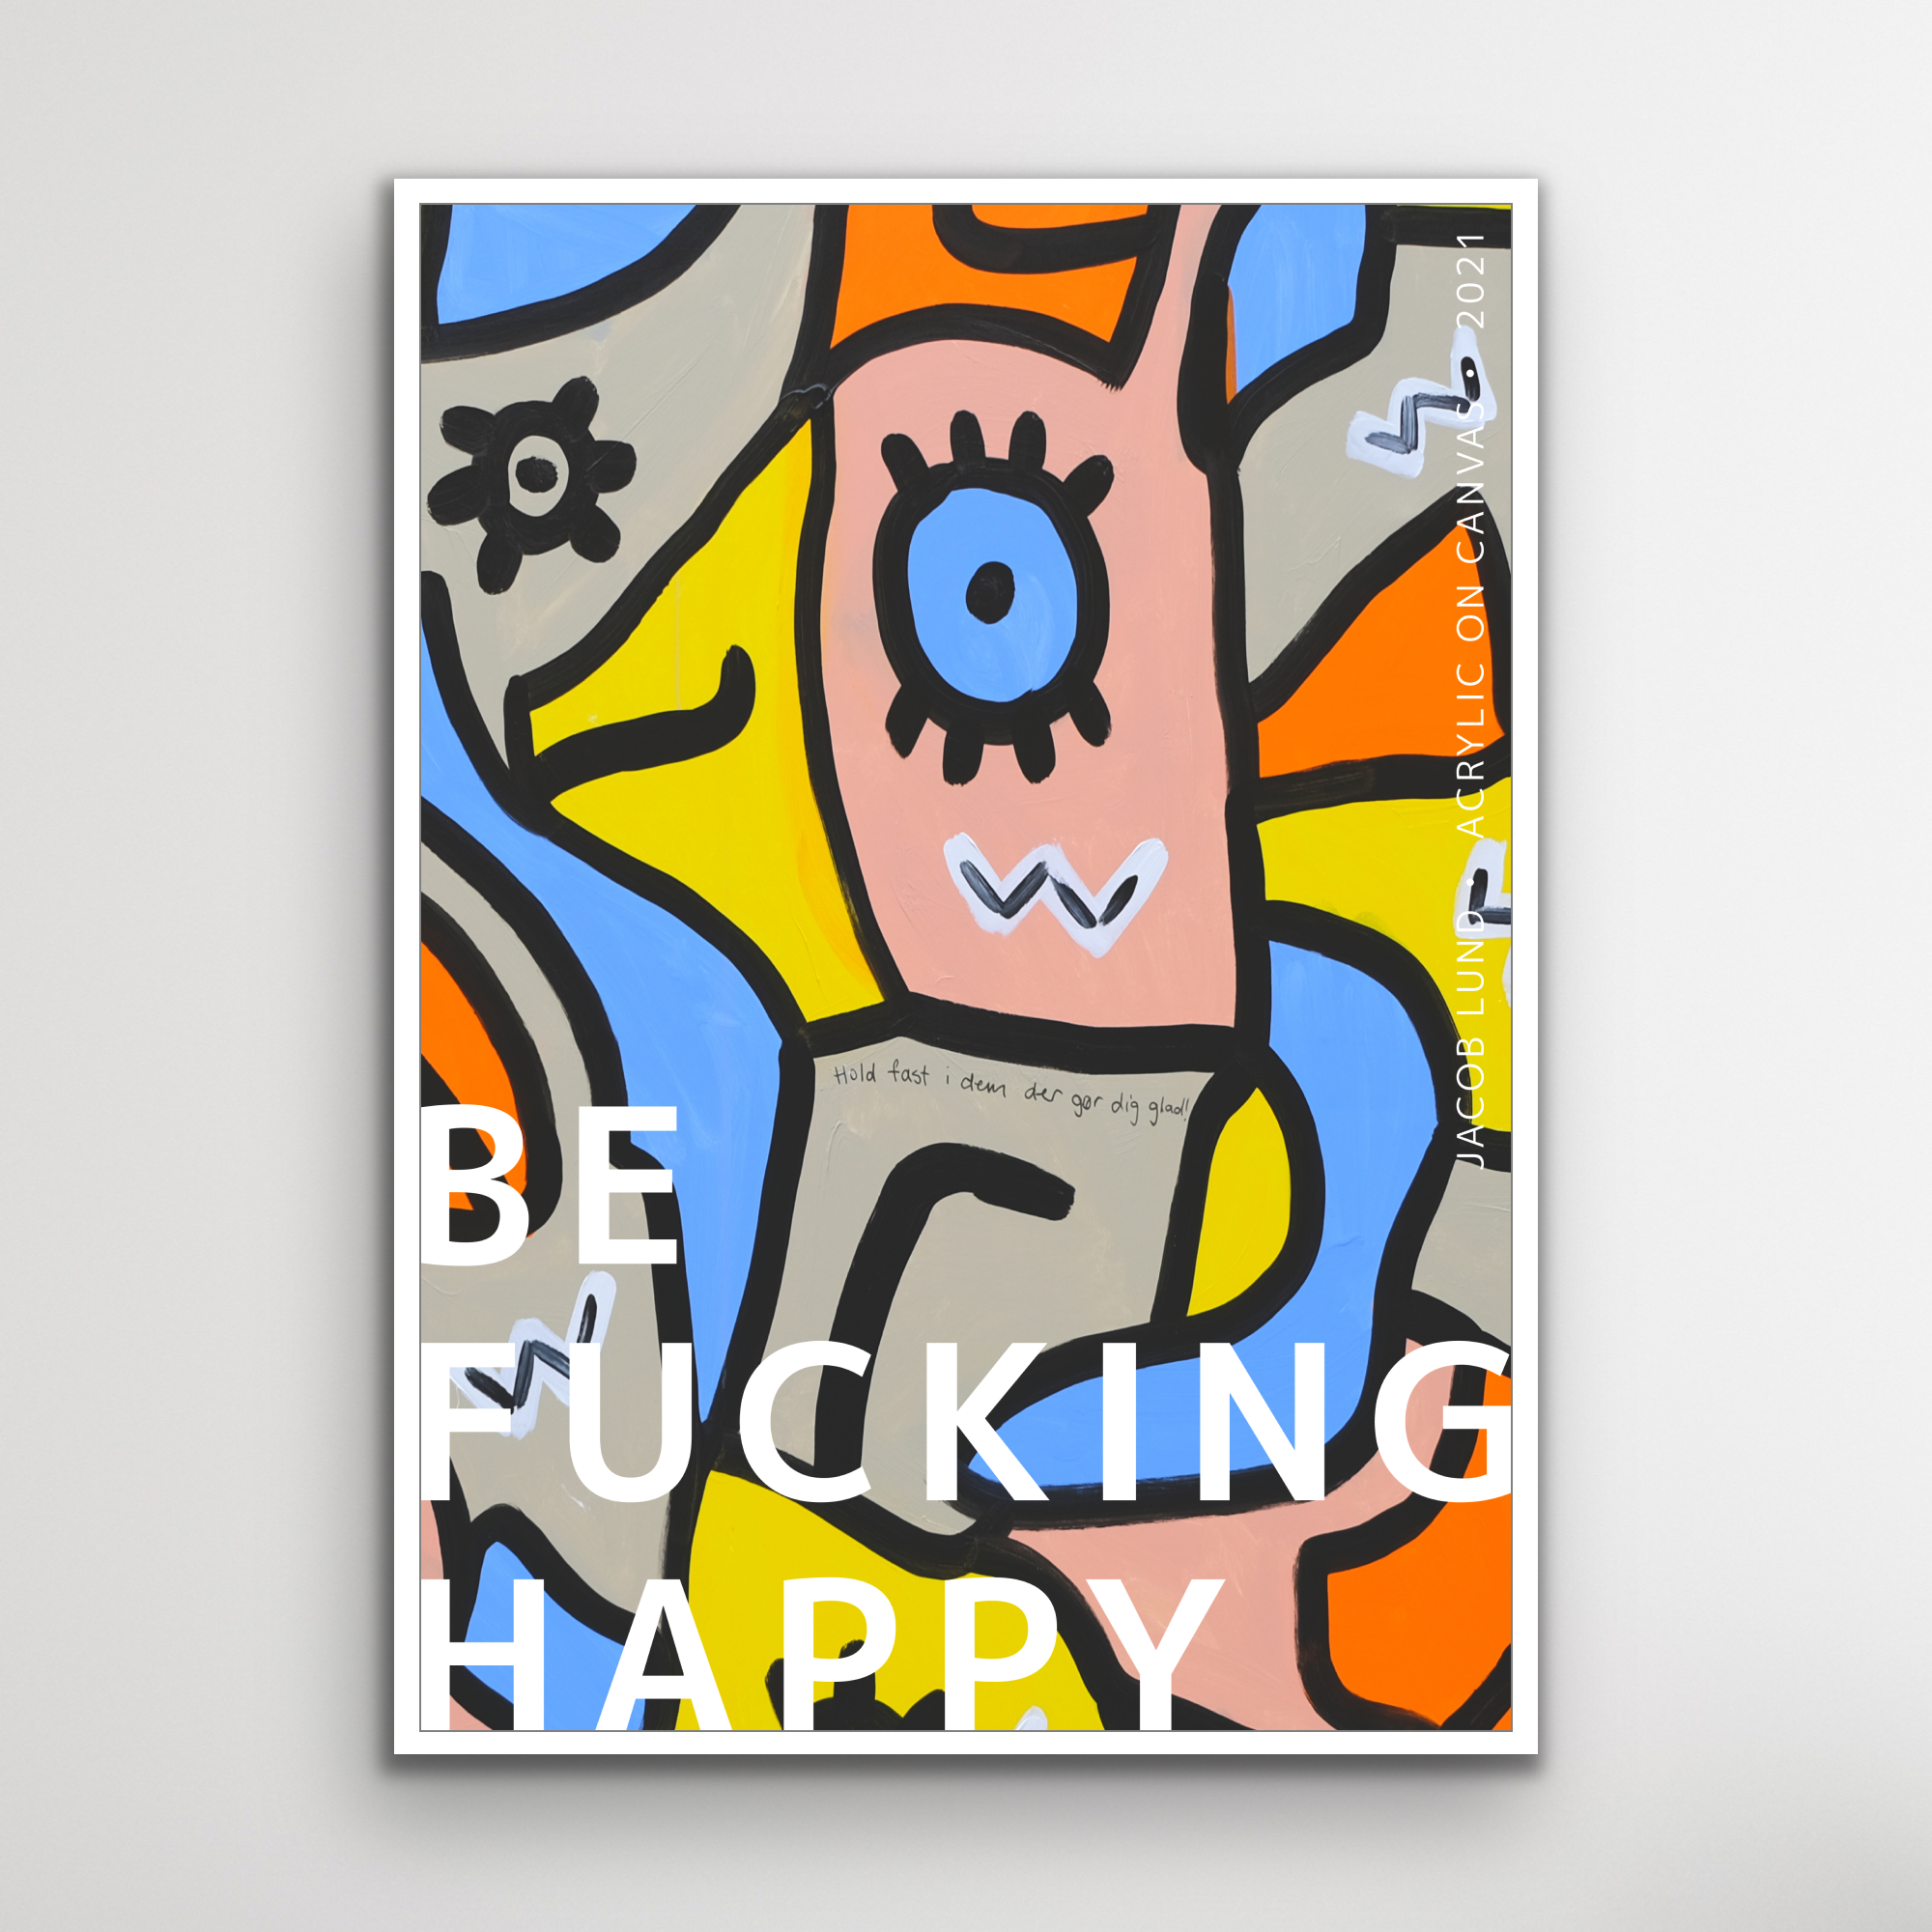 Poster: "Be F** Happy"